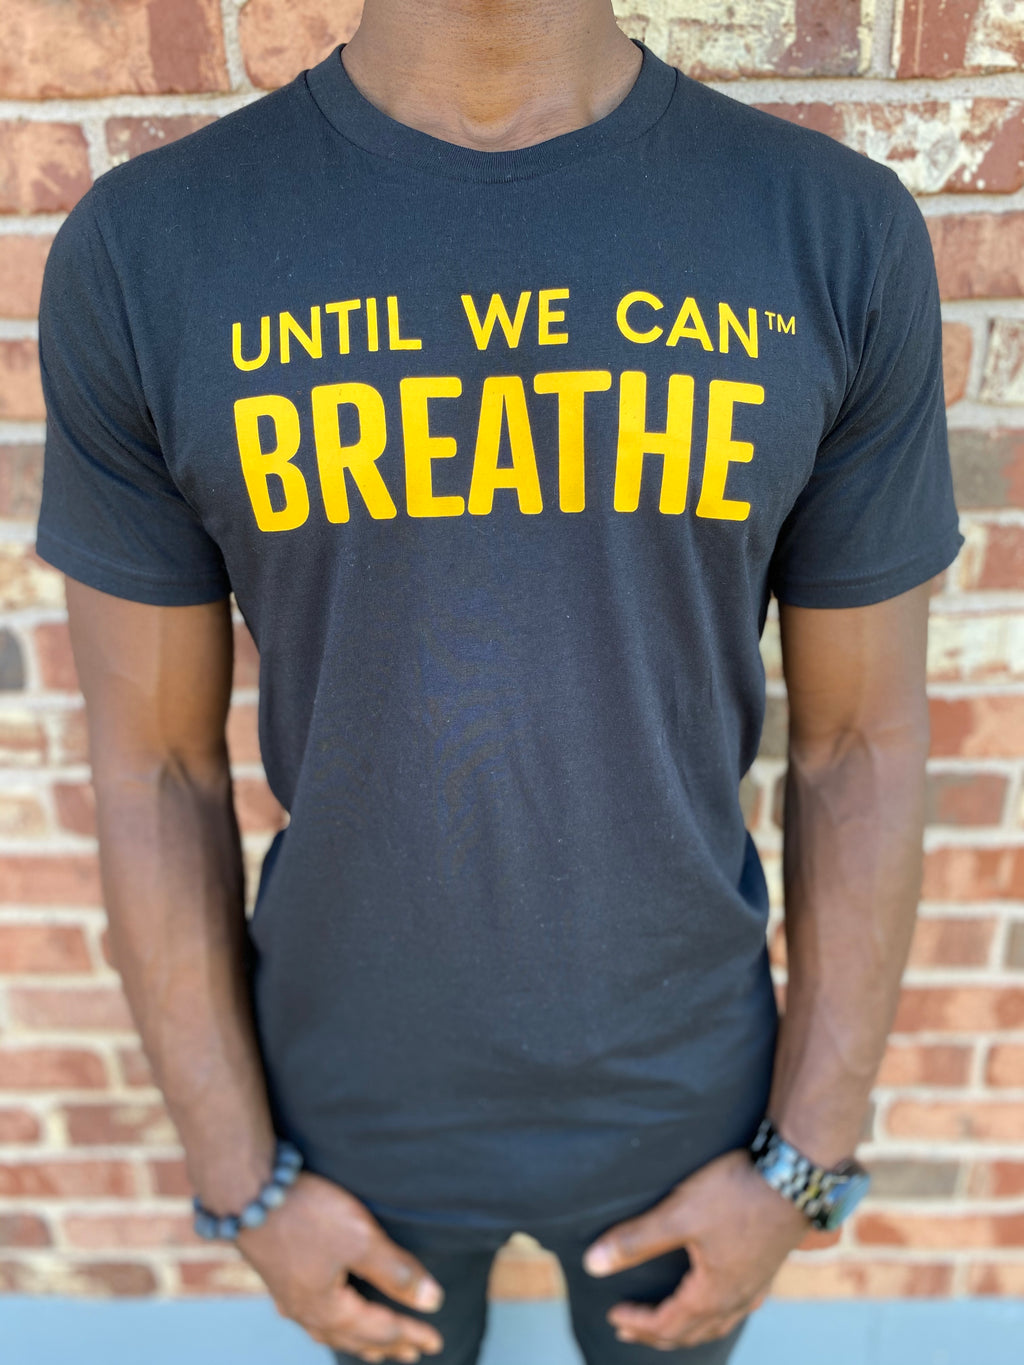 Short sleeve black t-shirt with yellow gold "Until We Can Breathe" texts, in support of Black Lives Matter, racial justice, and black pride. Remembering the last works of Eric Garner, George Floyd, and many others. Made by black woman owned business and environmentally friendly.